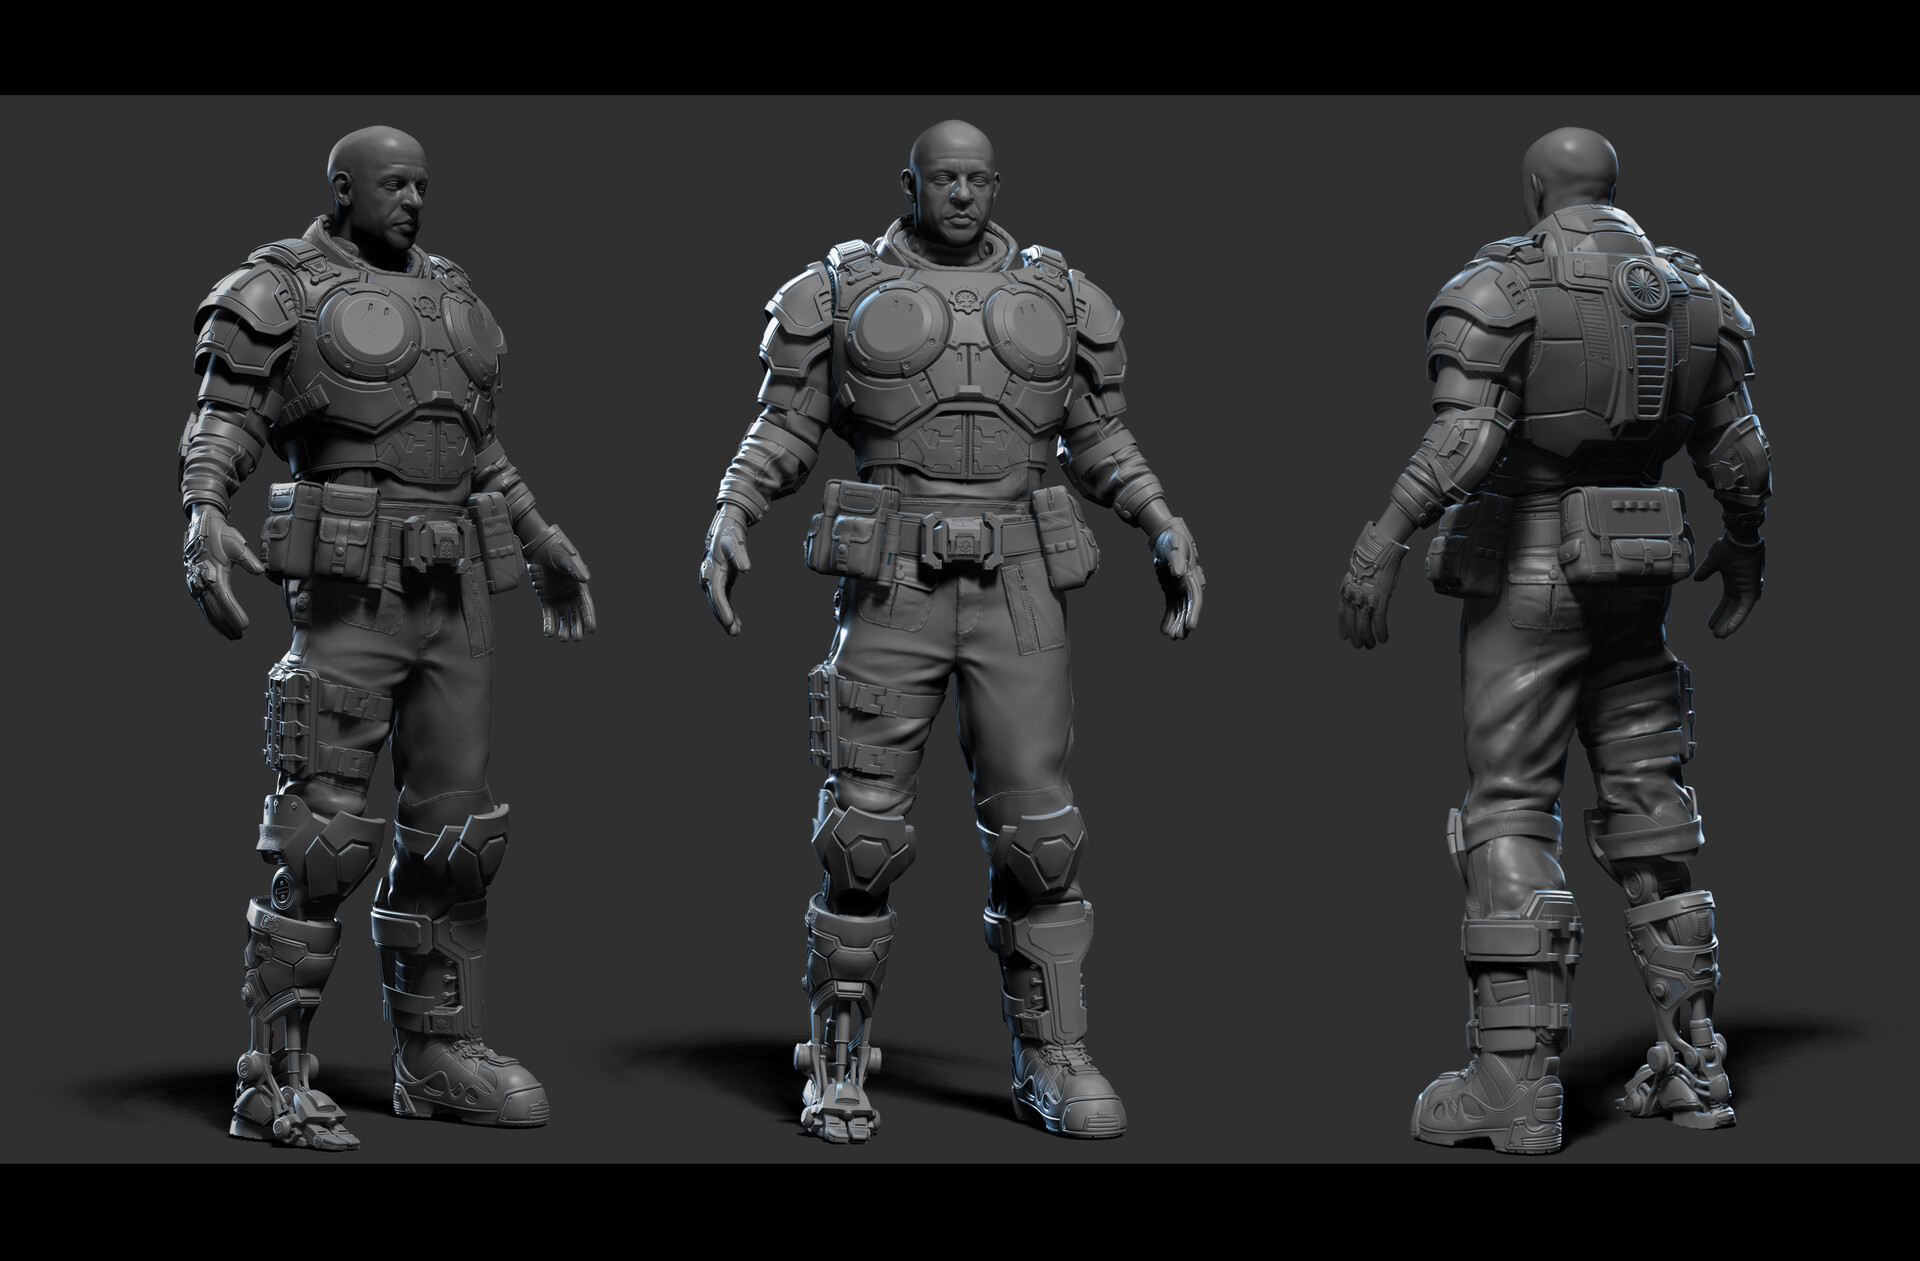 DSNG'S SCI FI MEGAVERSE: GEARS OF WAR JUDGMENT - GAME CHARACTERS,  WALLPAPERS, SCI FI ARMOR, 3D ART, FUTURISTIC CONCEPT DESIGNS